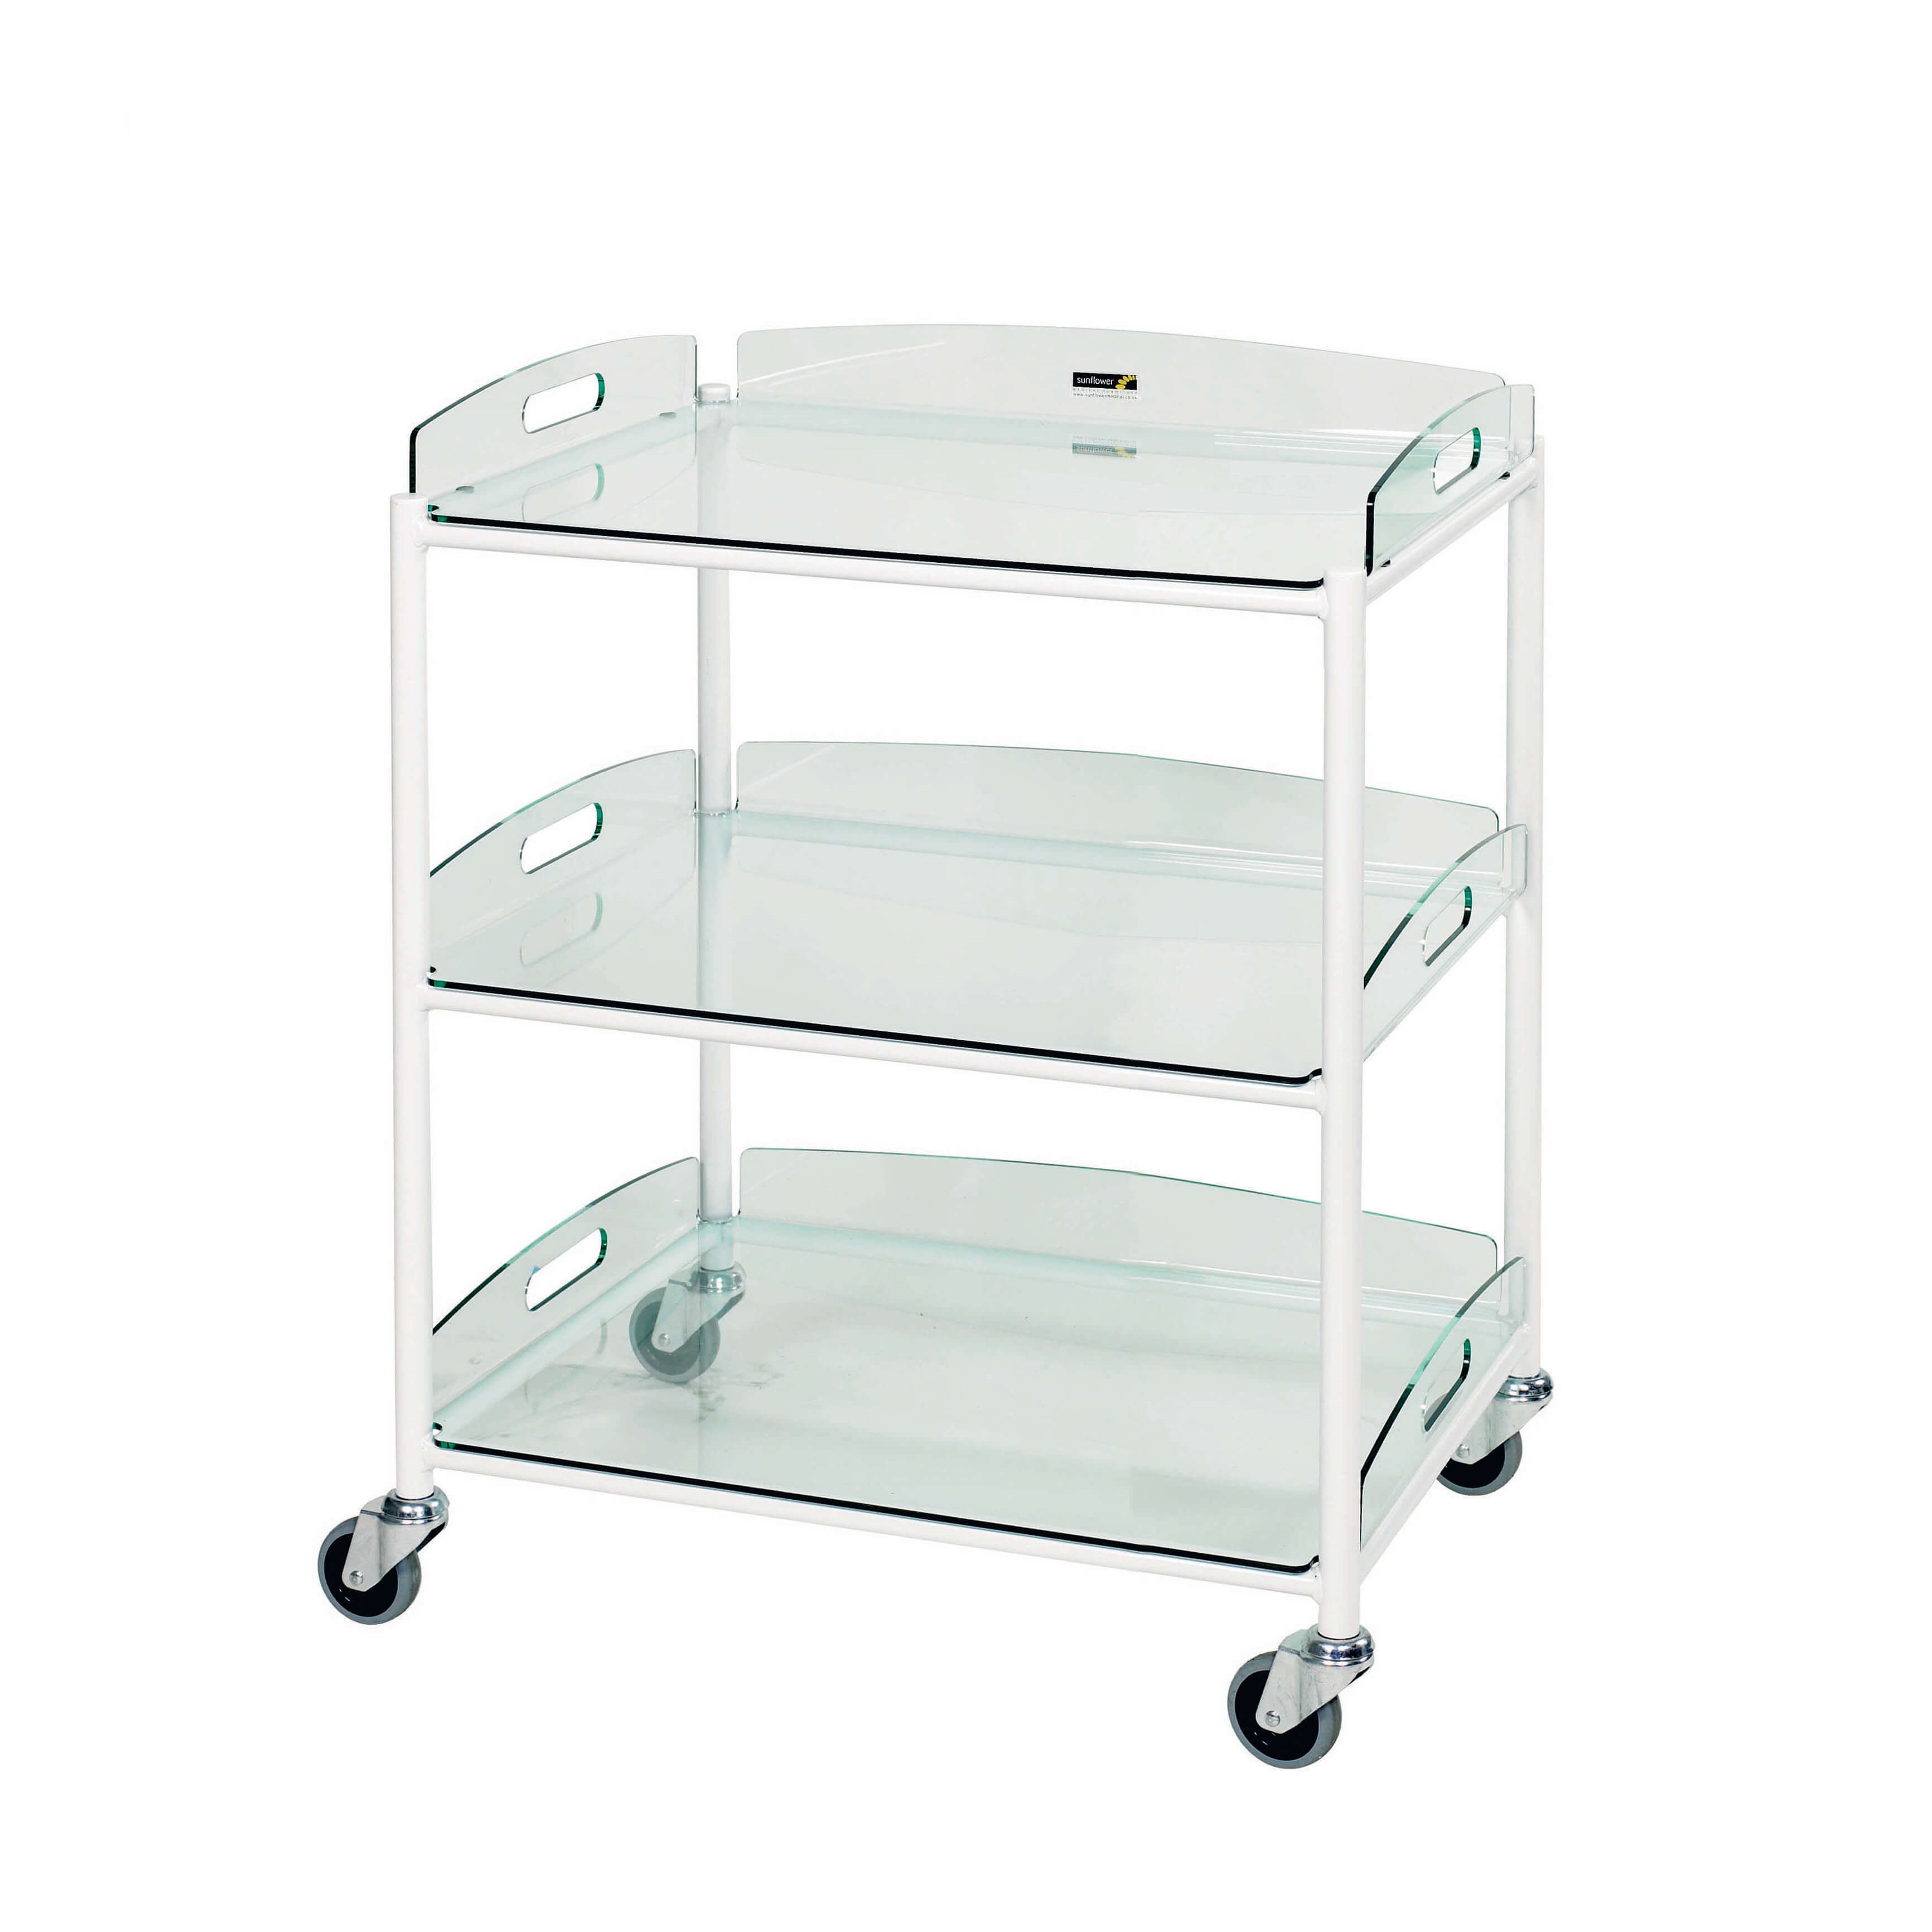 Dressing Trolley, 3 Glass Effect Safety Trays [Sun-DT6G3]